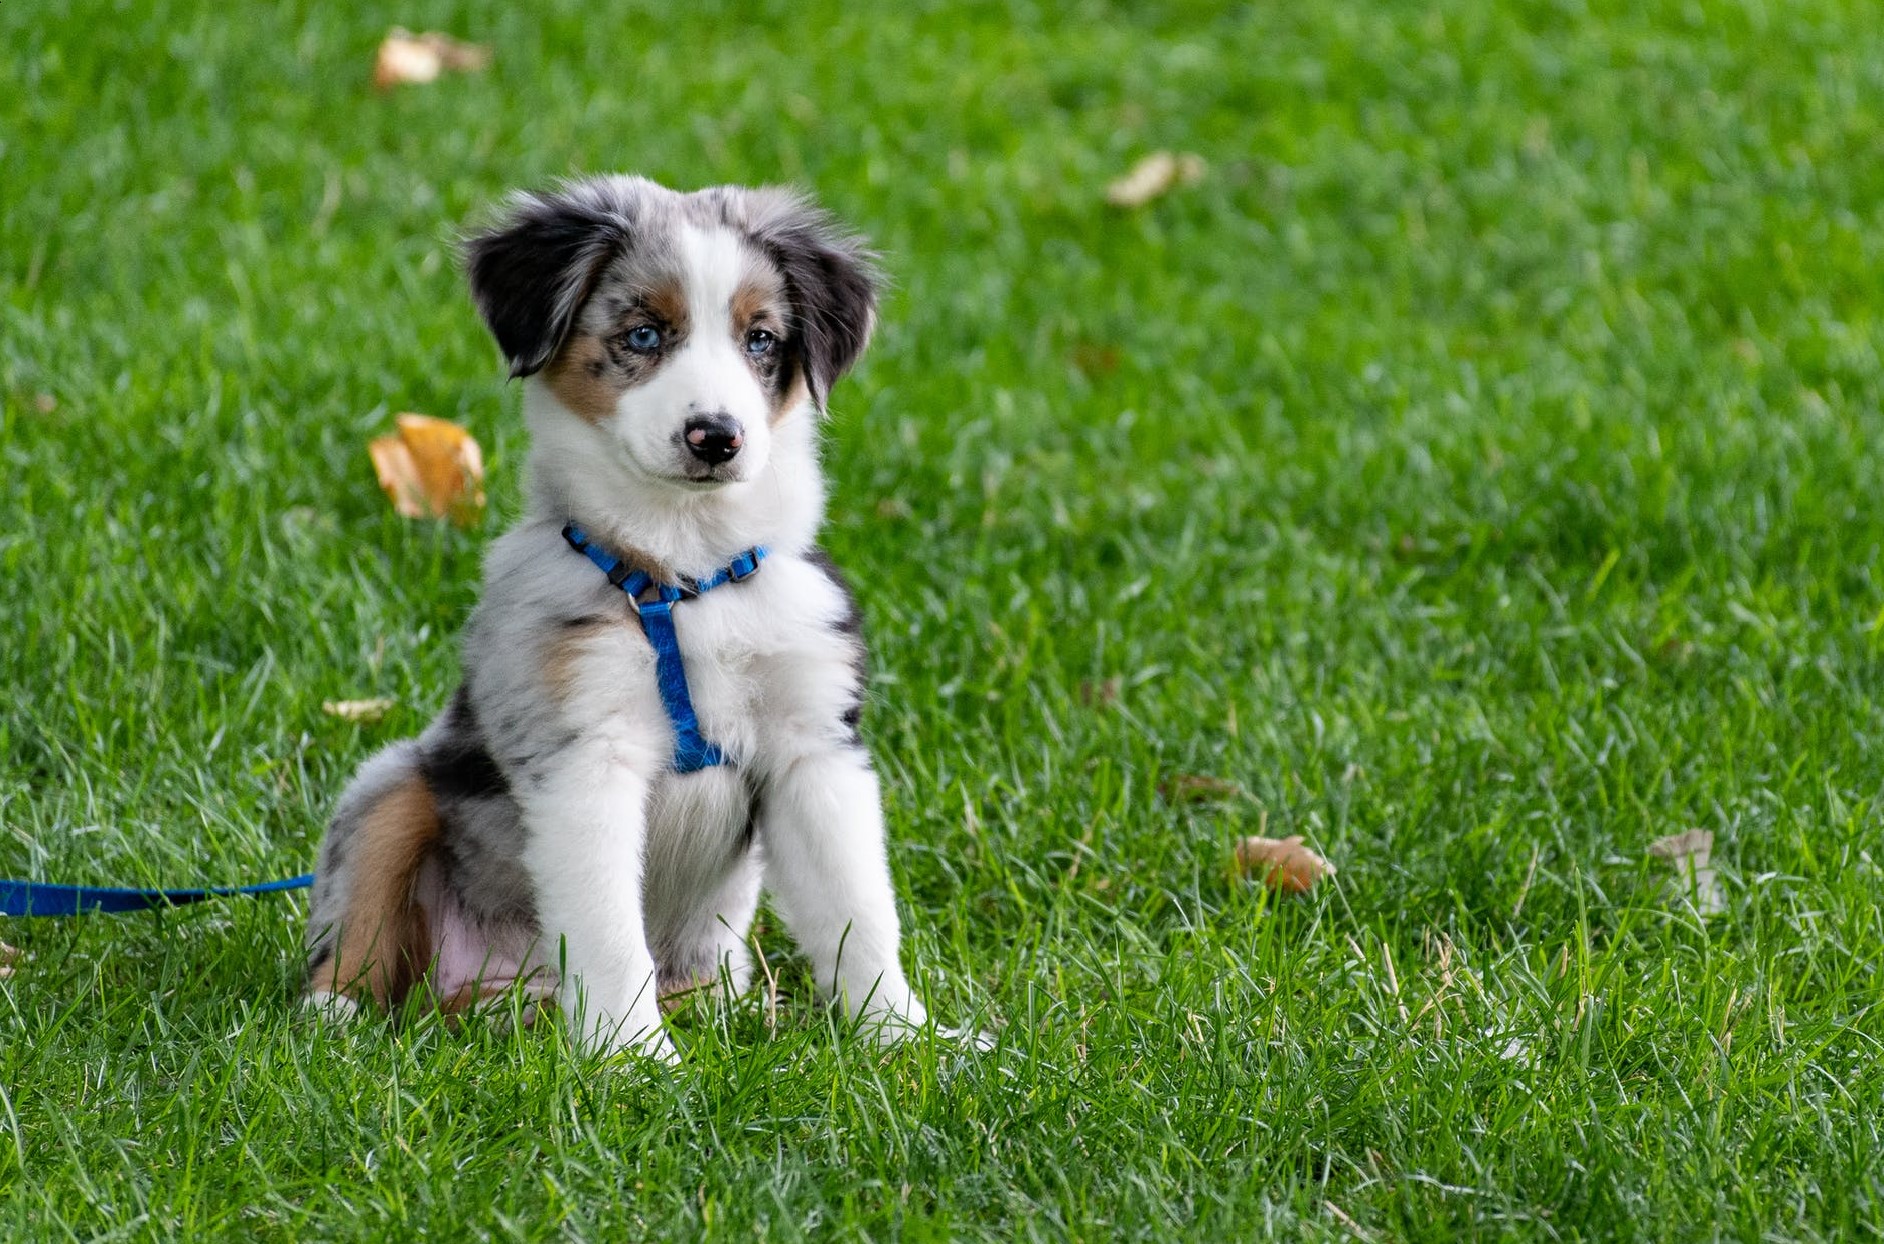 A puppy in a harness sitting patiently in a grassy garden